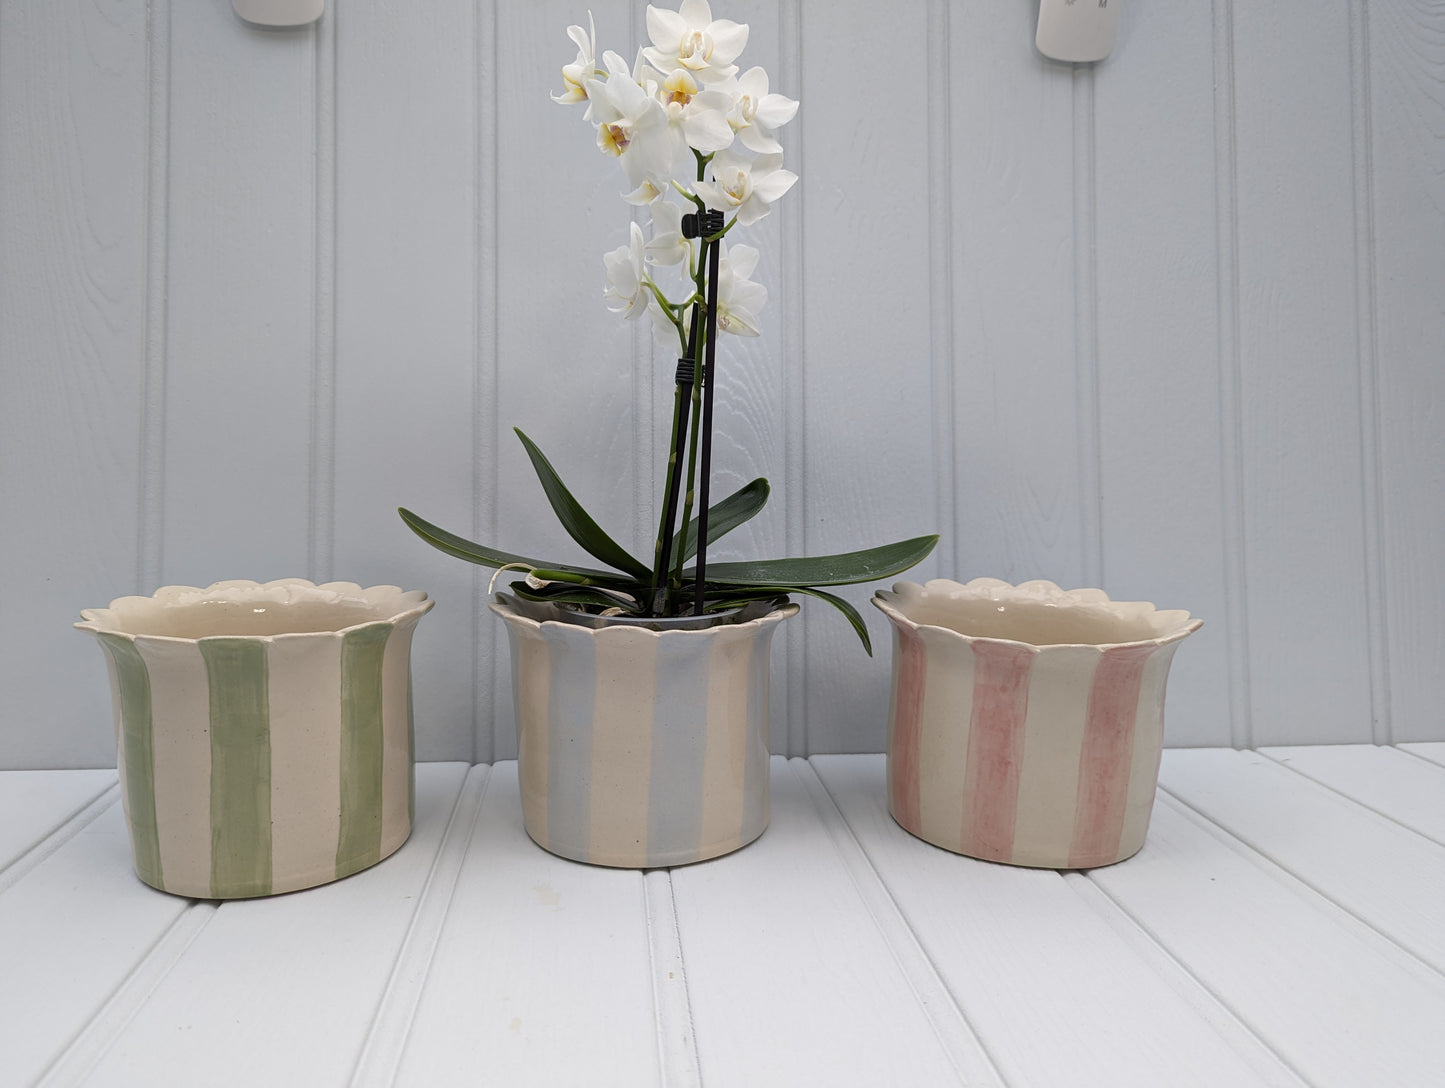 3 Small, Handmade, Ceramic, Stoneware Orchid / Houseplant planters with scalloped top and stripes. One Sage, one Baby blue and one pink.